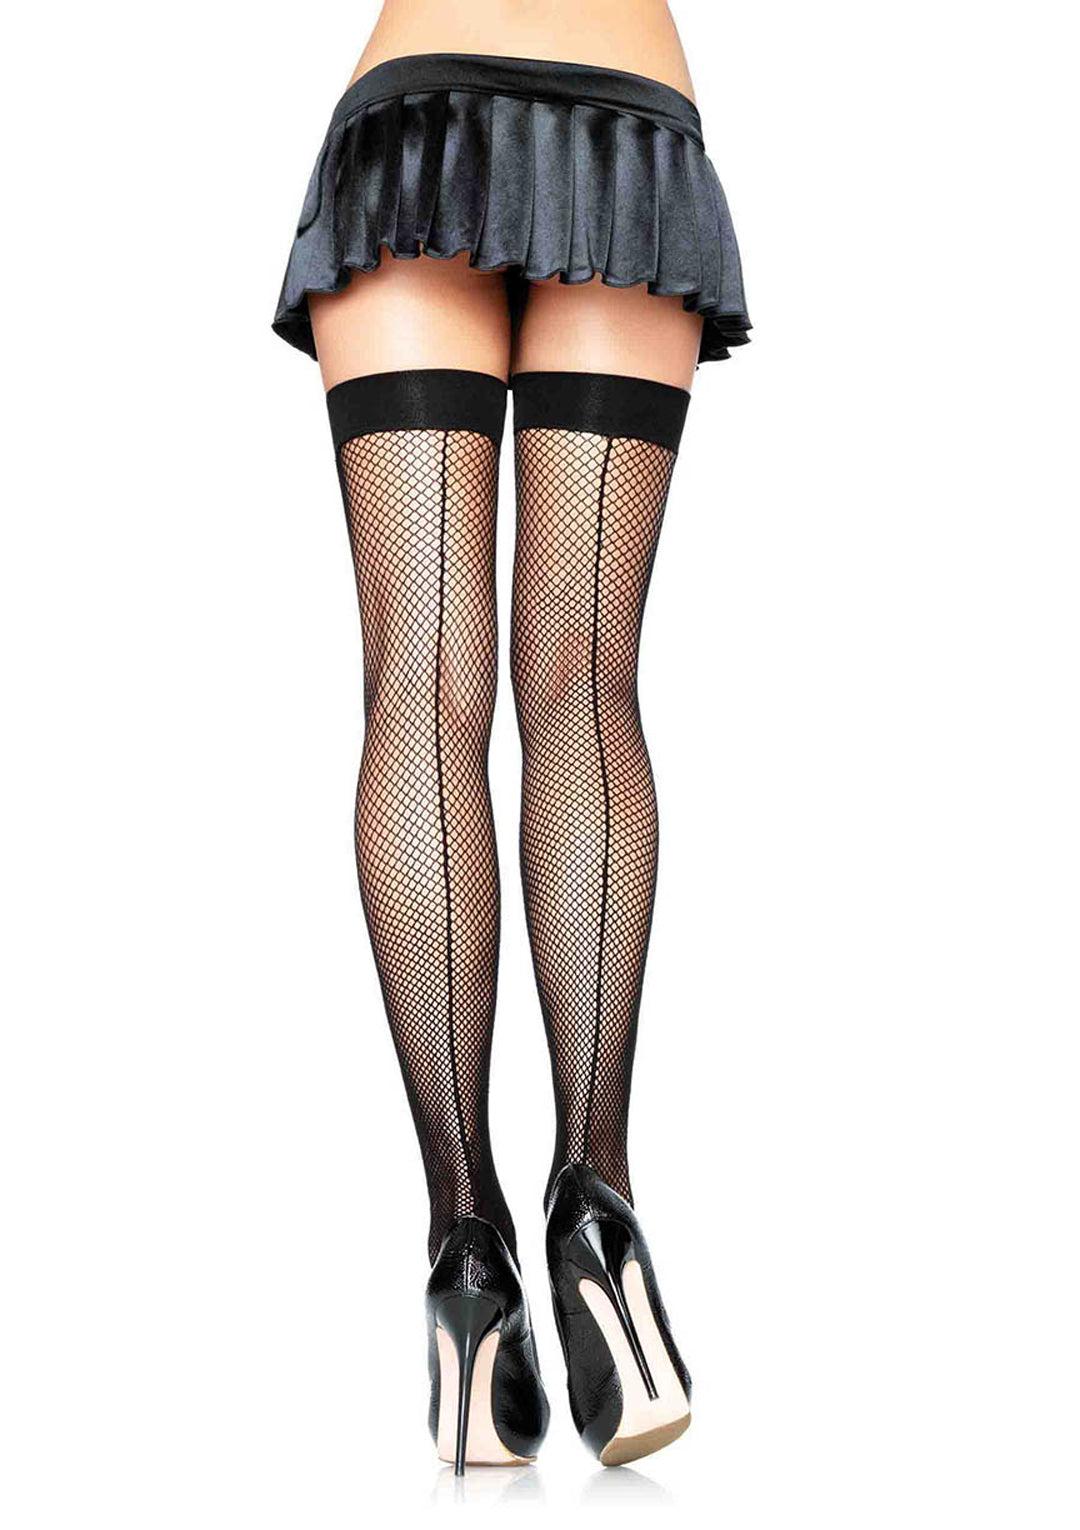 Plus Size Fiona Fishnet Thigh Highs